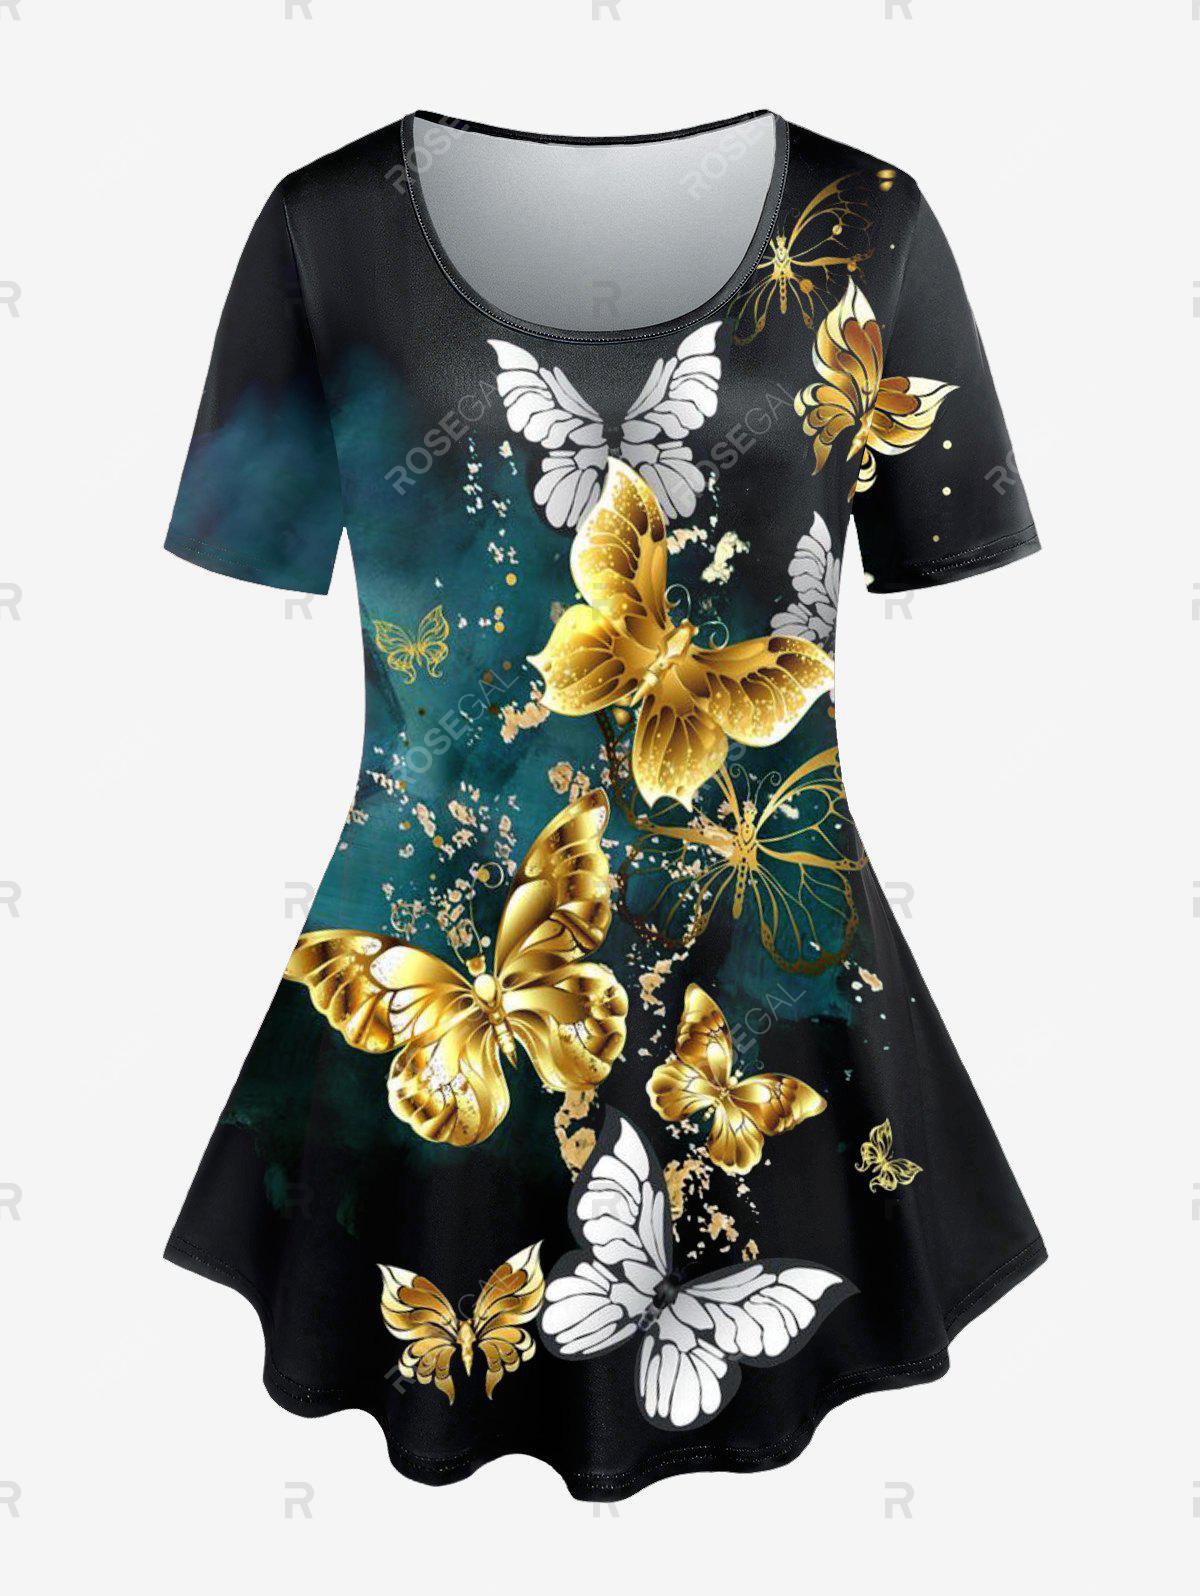 Butterfly Print Tee and Leggings Plus Size Summer Outfit